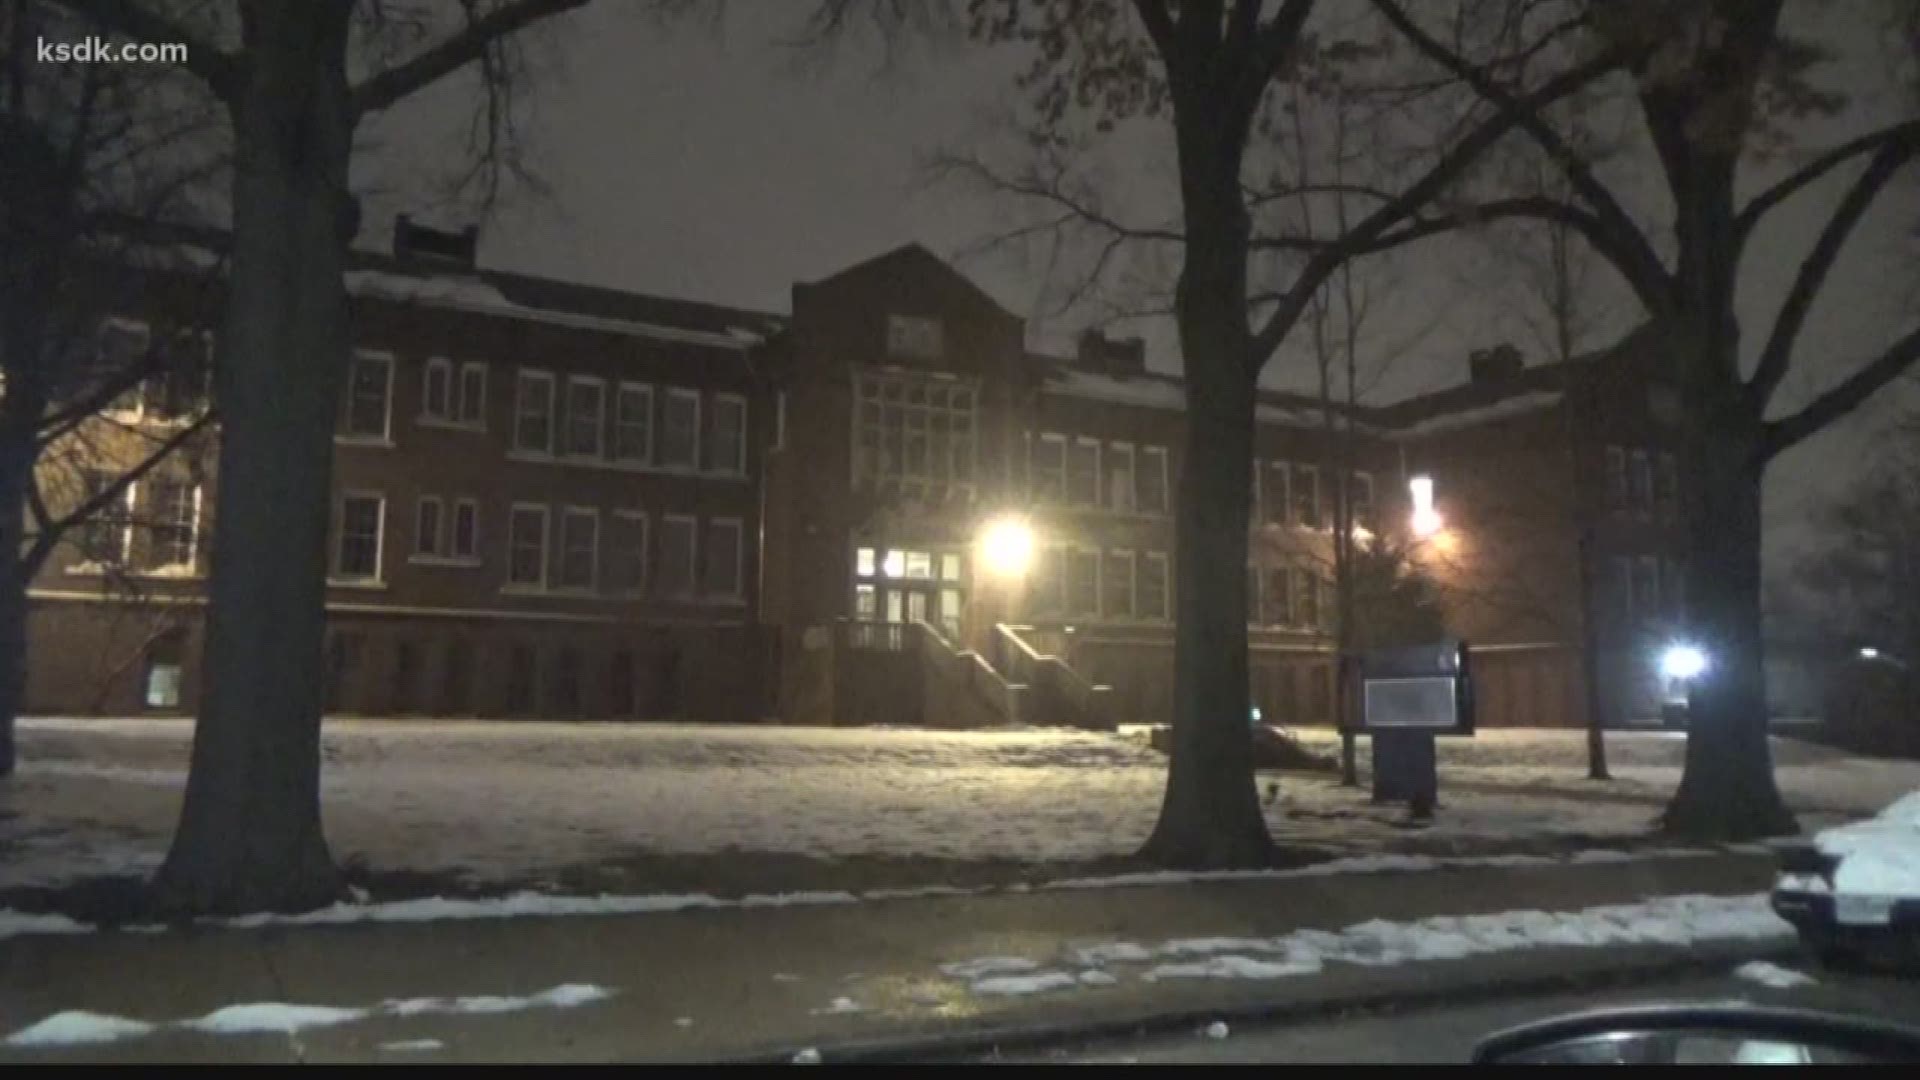 There could be one more abandoned school in north St. Louis after a meeting Thursday night. The St. Louis Public Schools superintendent is expected to recommend closing Farragut Elementary.